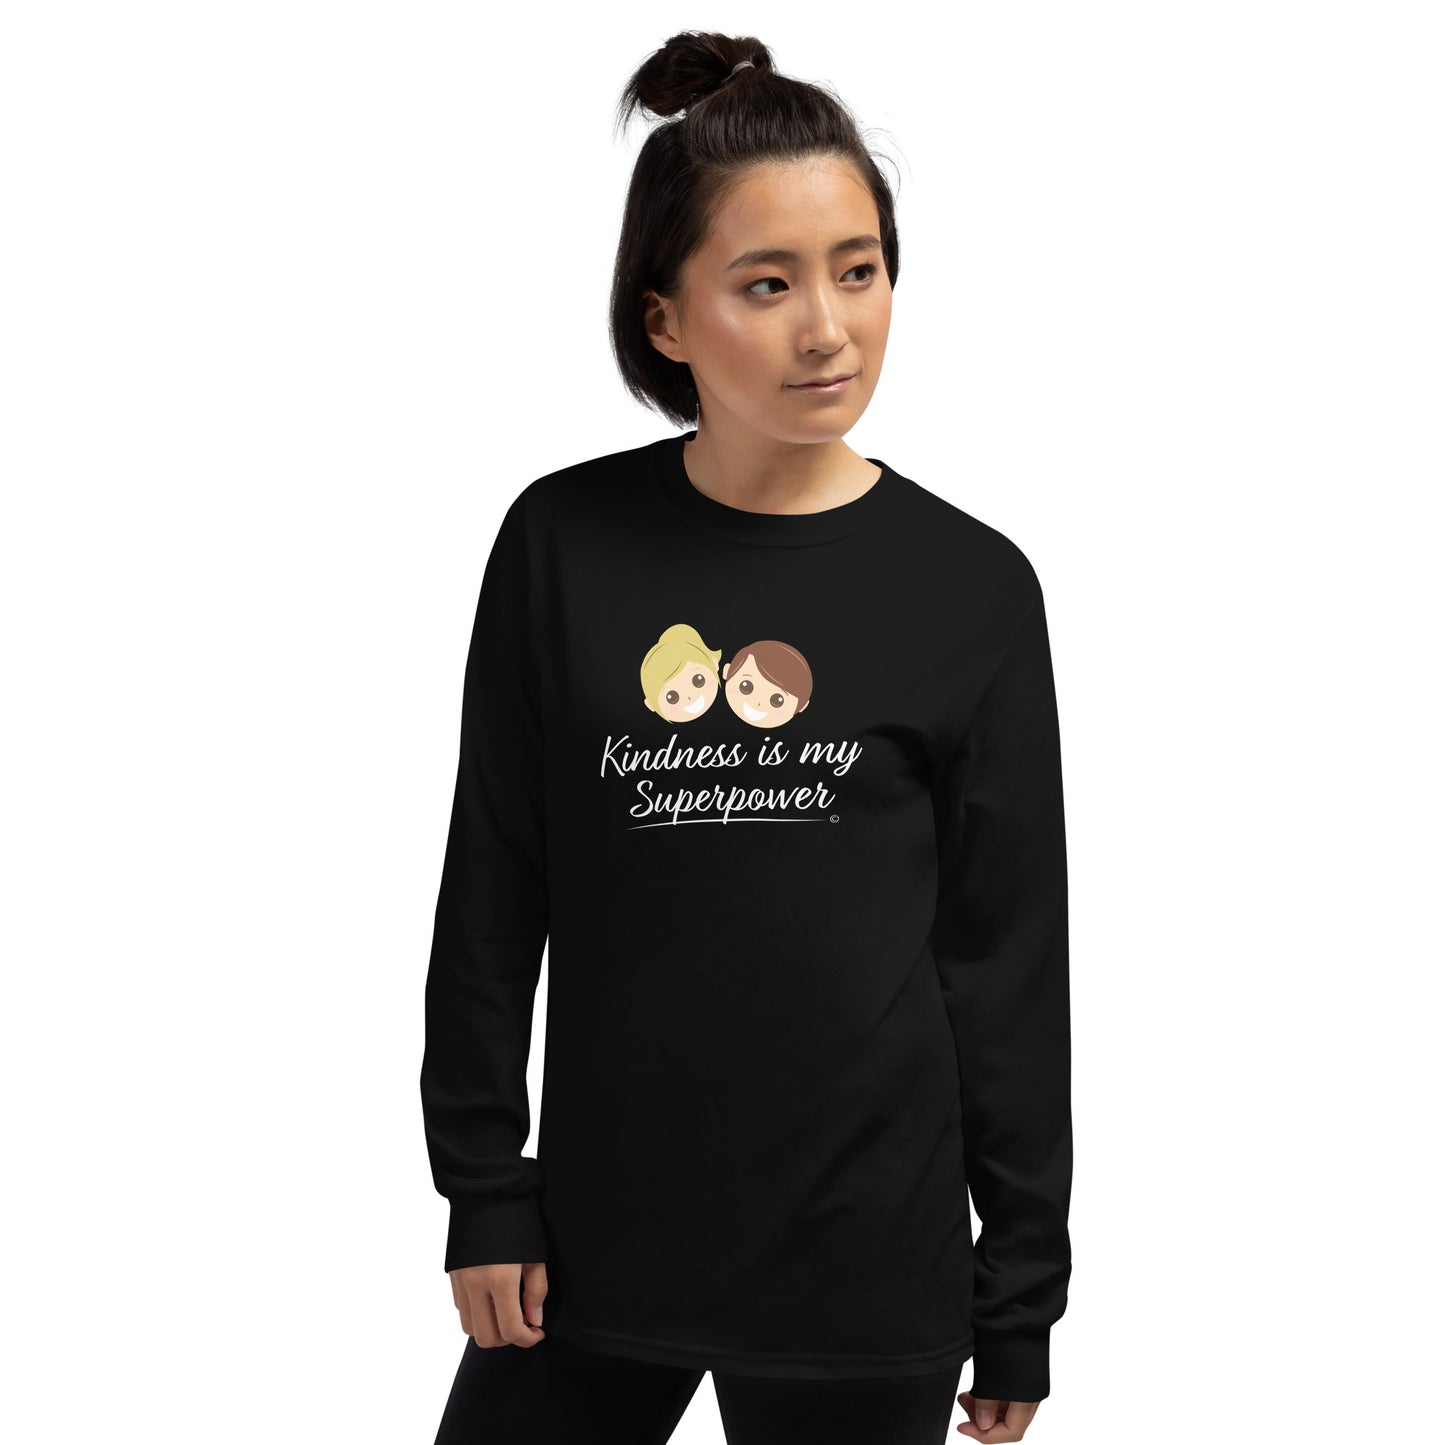 A confident young woman wearing a stylish long sleeve shirt in [black, featuring the empowering quote 'Kindness is my Superpower' in bold lettering.